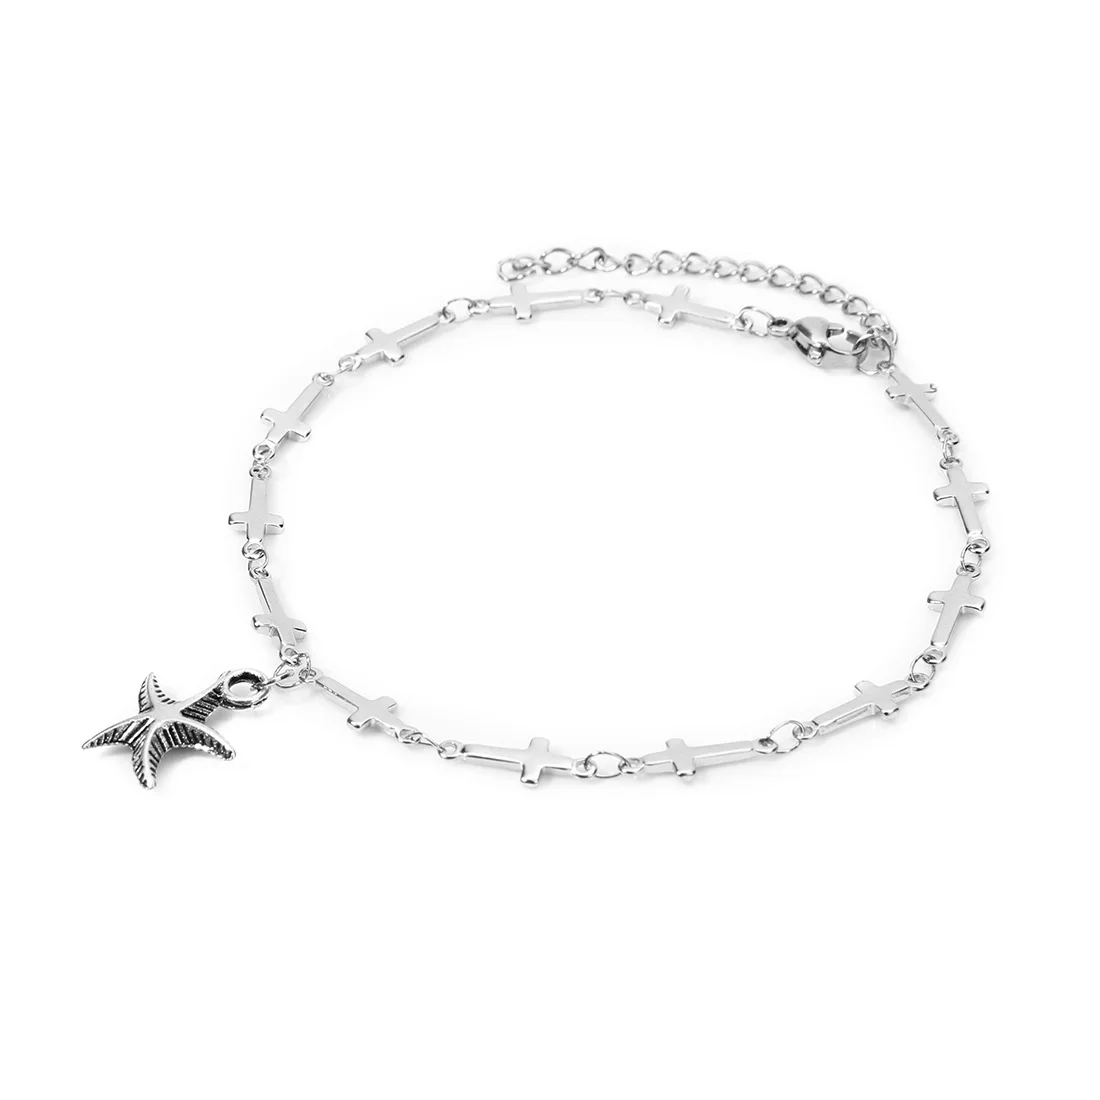 

Beach Stainless Steel Hip Hop Ocean Starfish Pendant Anklet Cross Fashion Foot Chain Jewelry Anklet